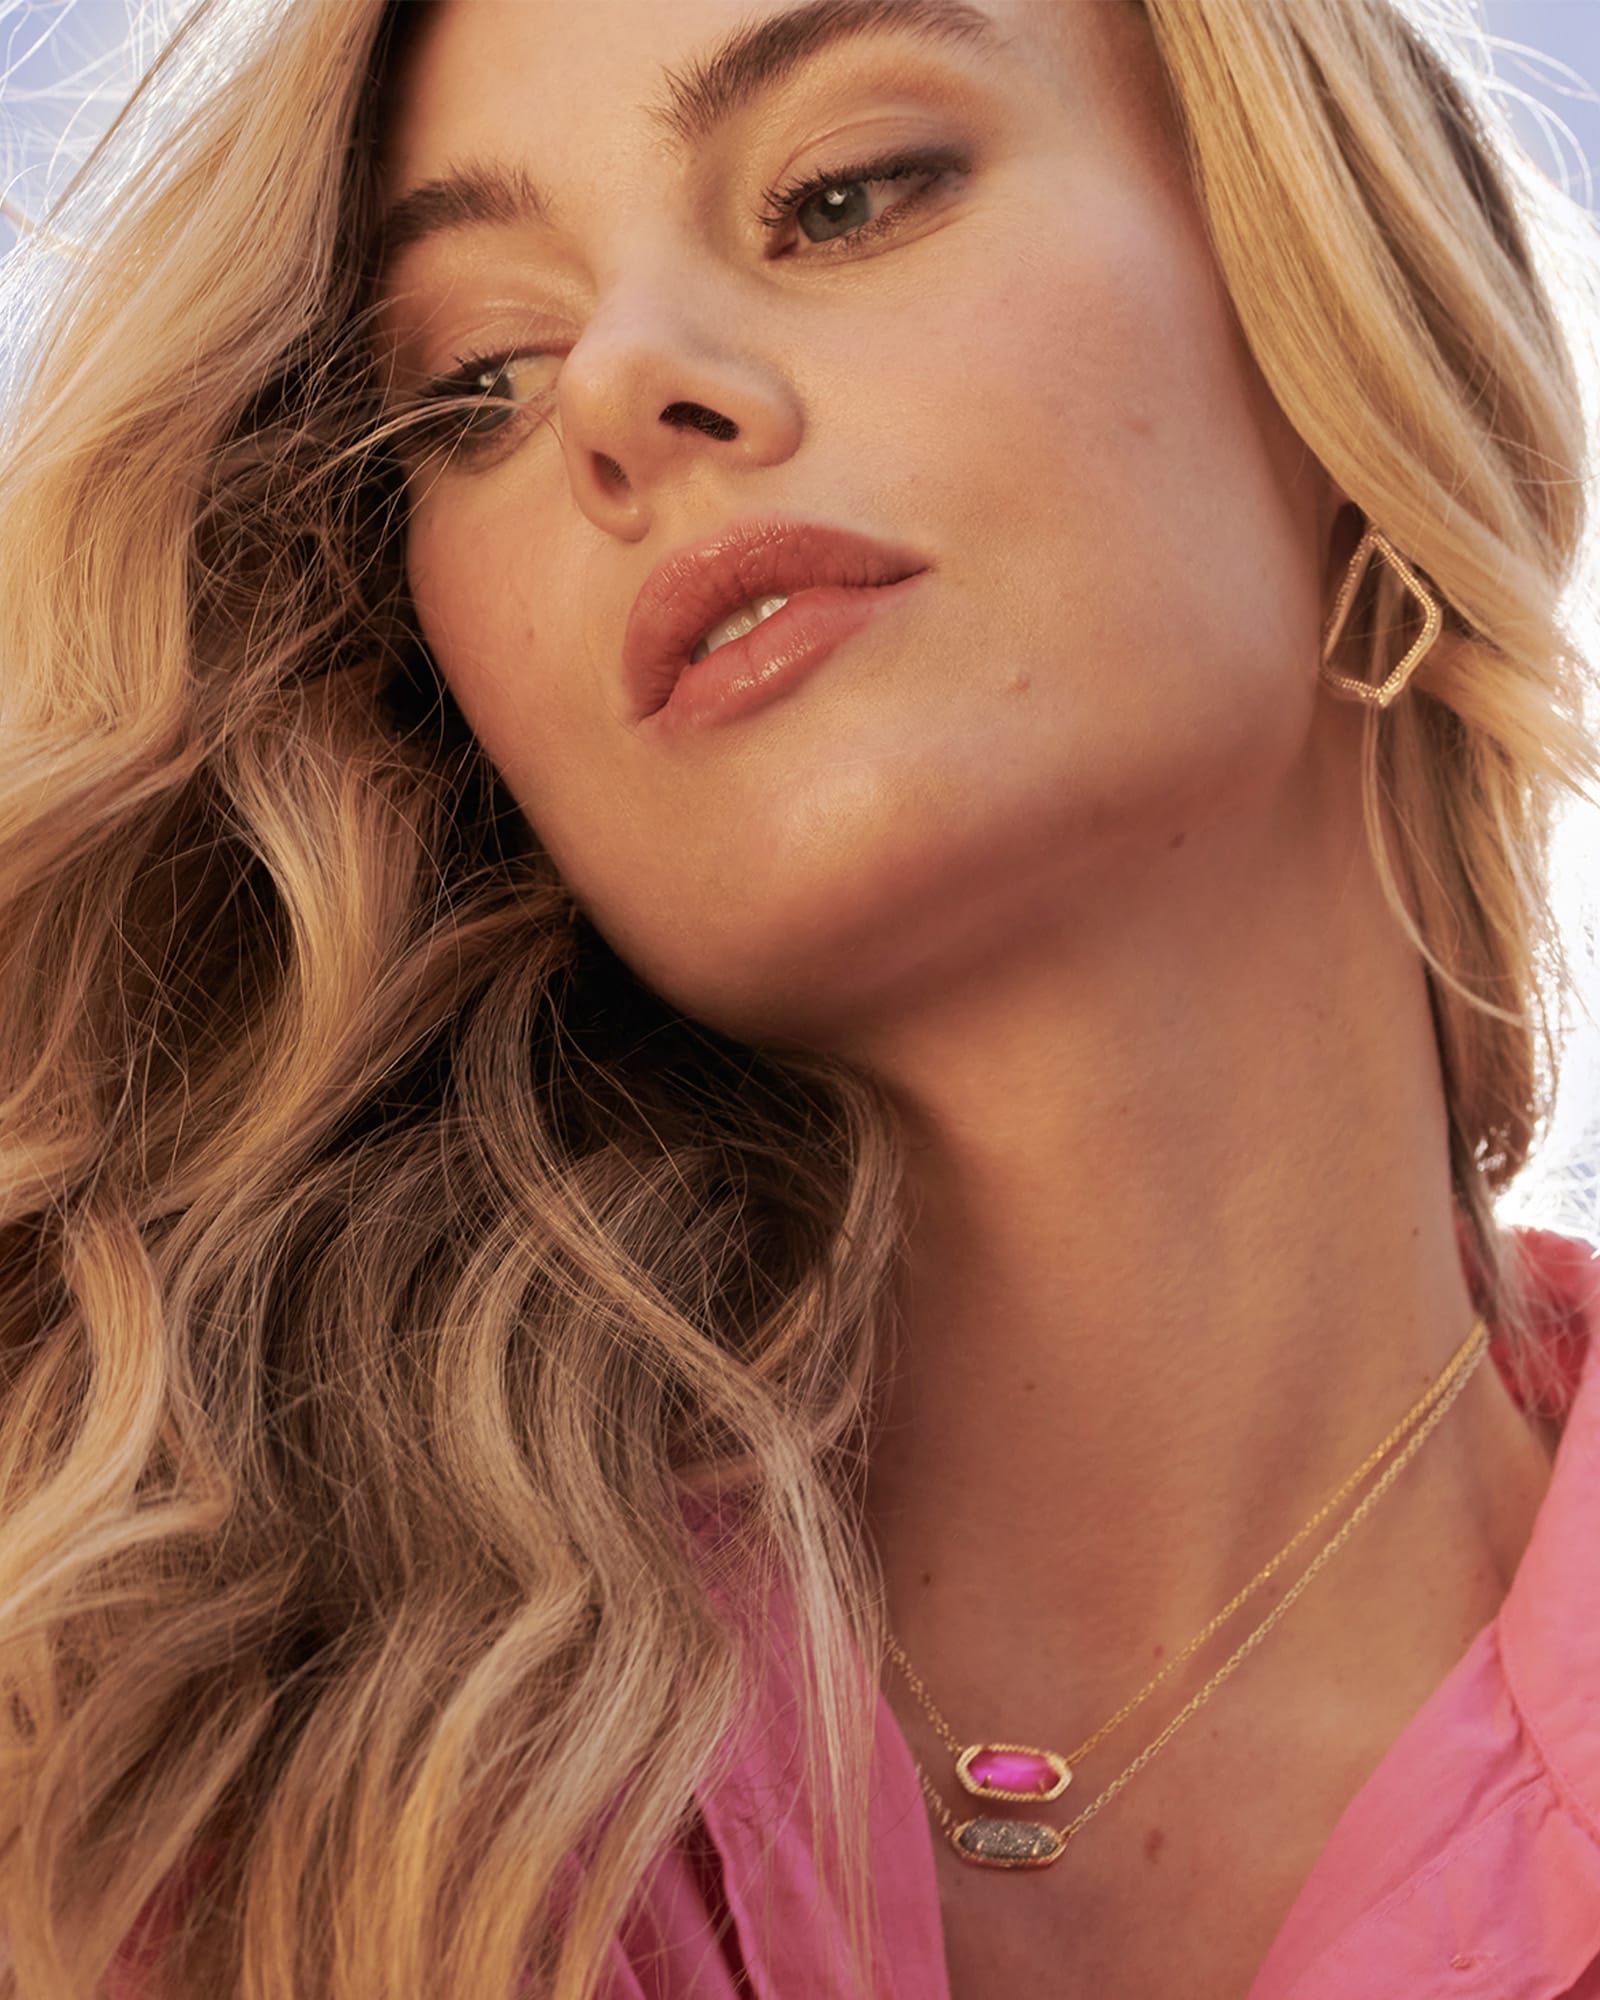 Hot PINK Kendra Scott earrings and necklaces are just what you